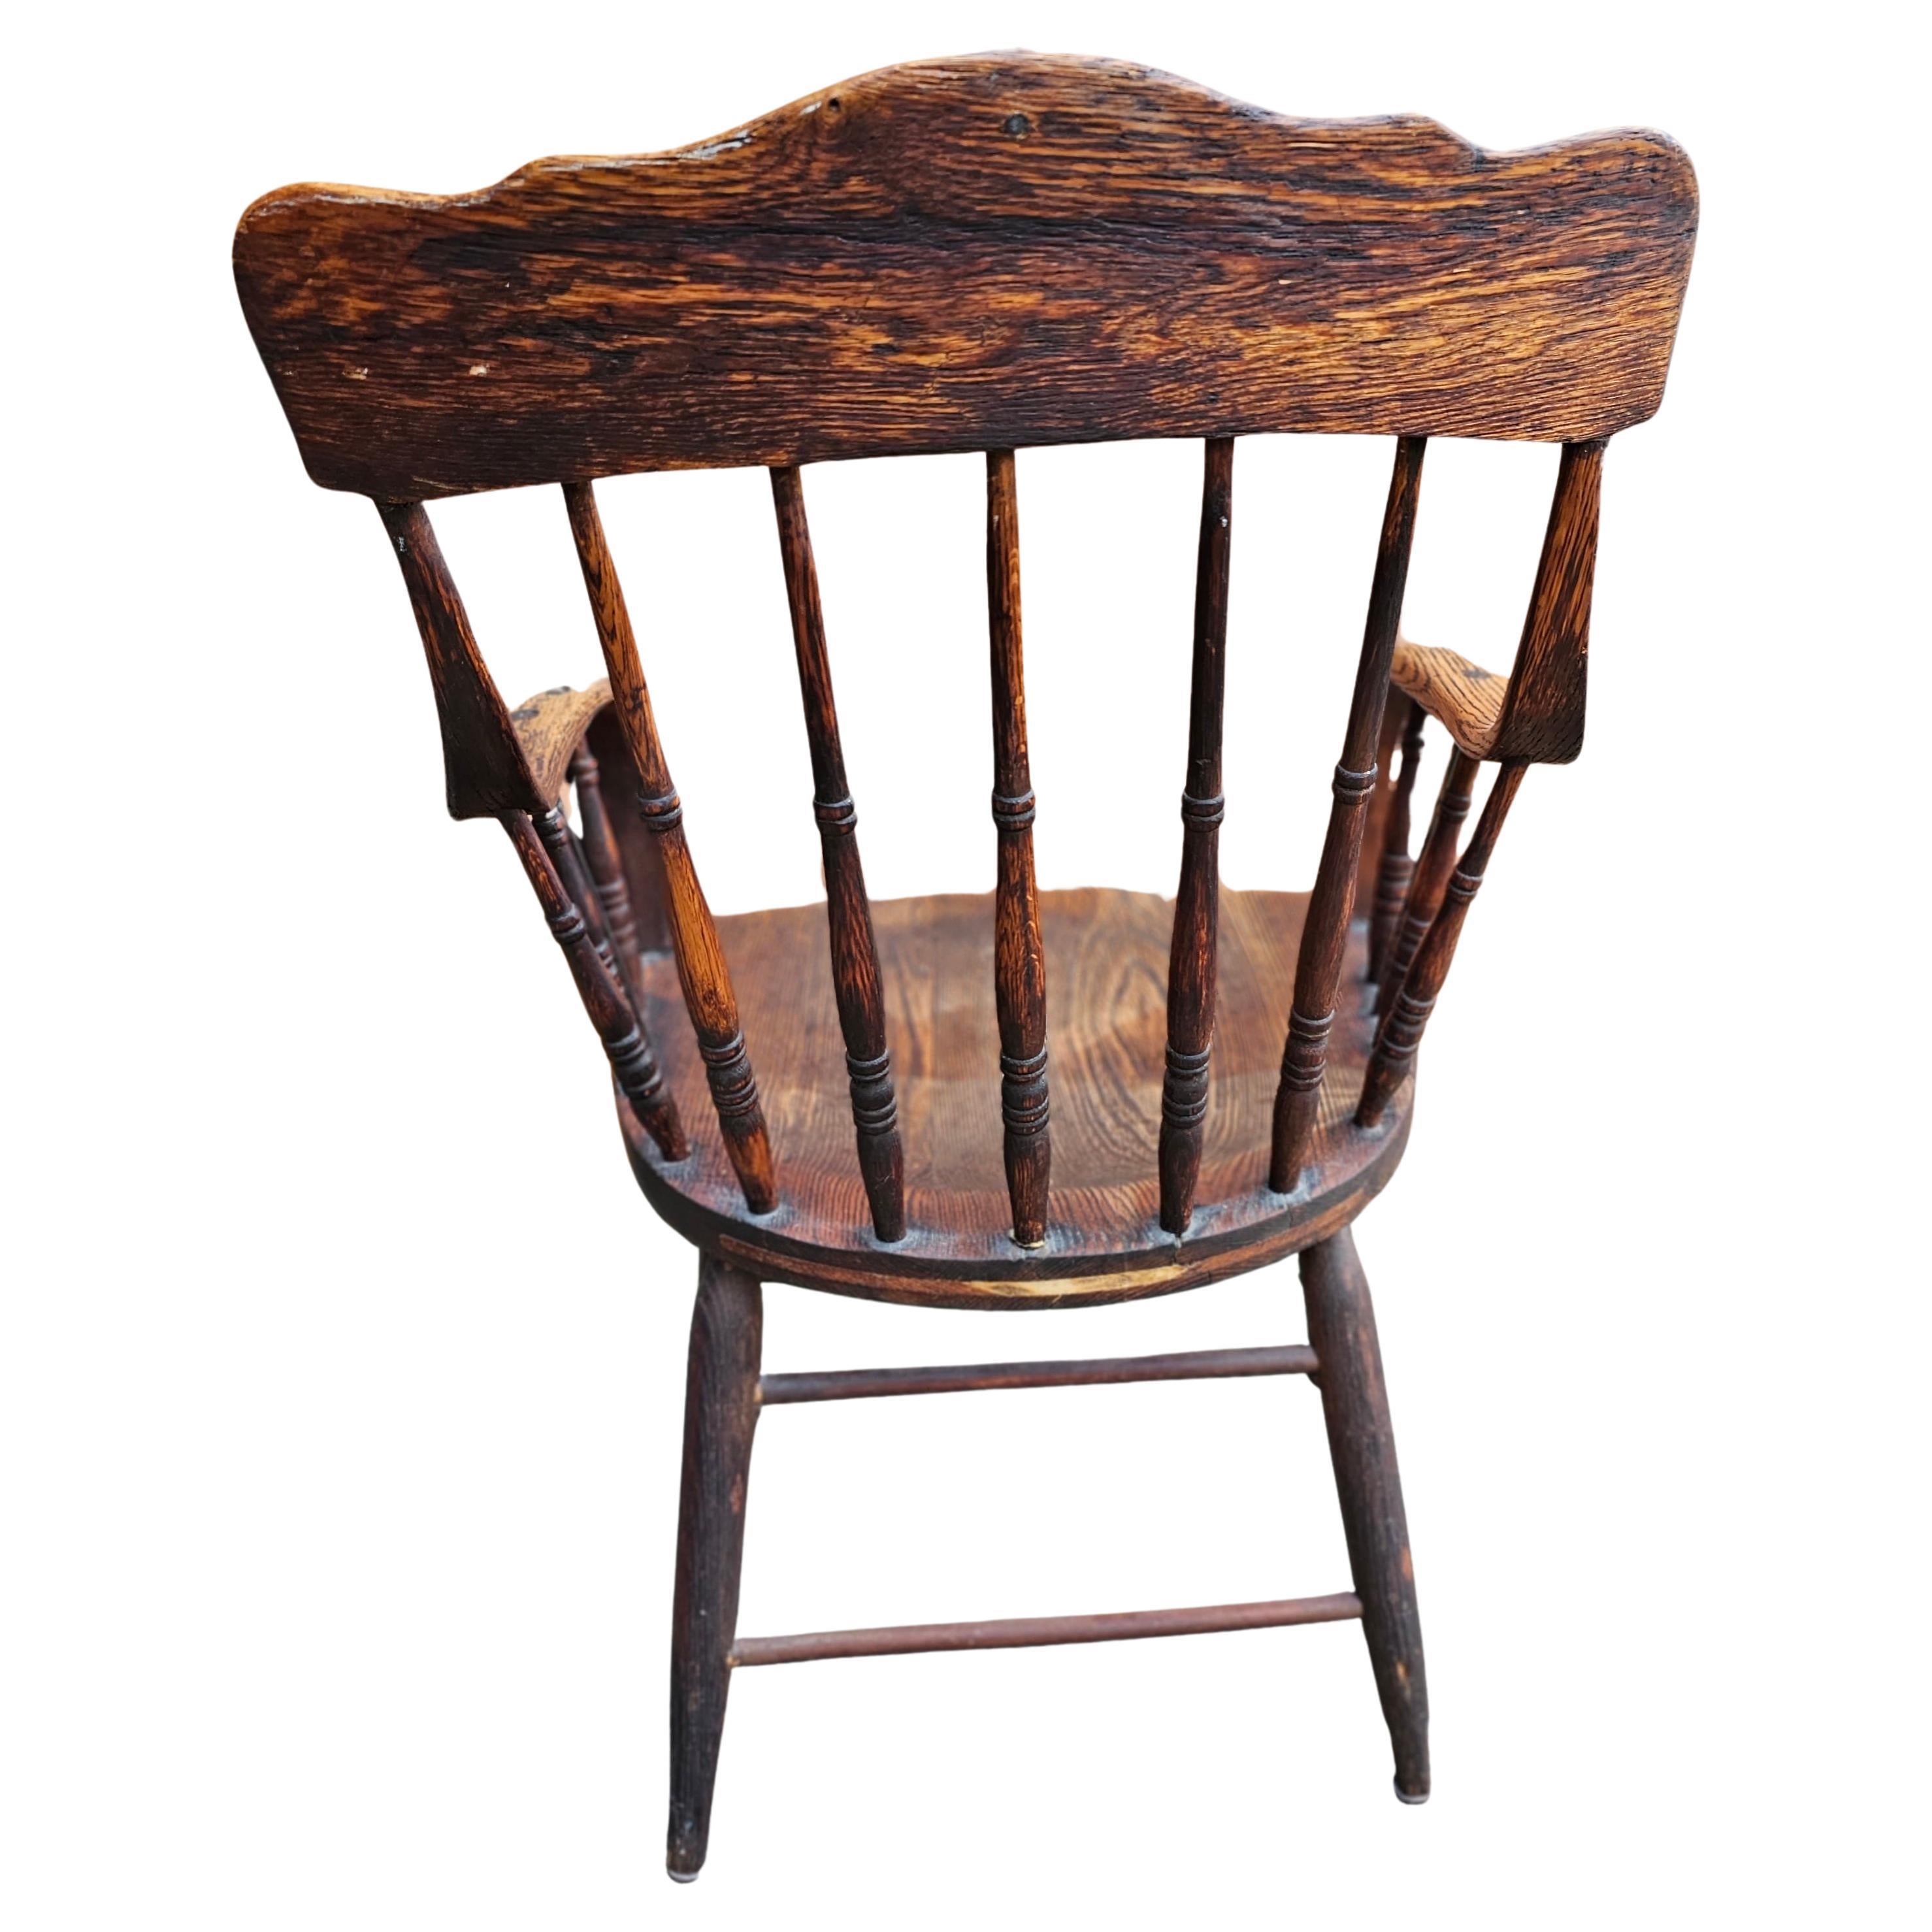 A 19th Century Spindle Oak Windsor Continuous Arm Chair in sturdy condition. Measures 22